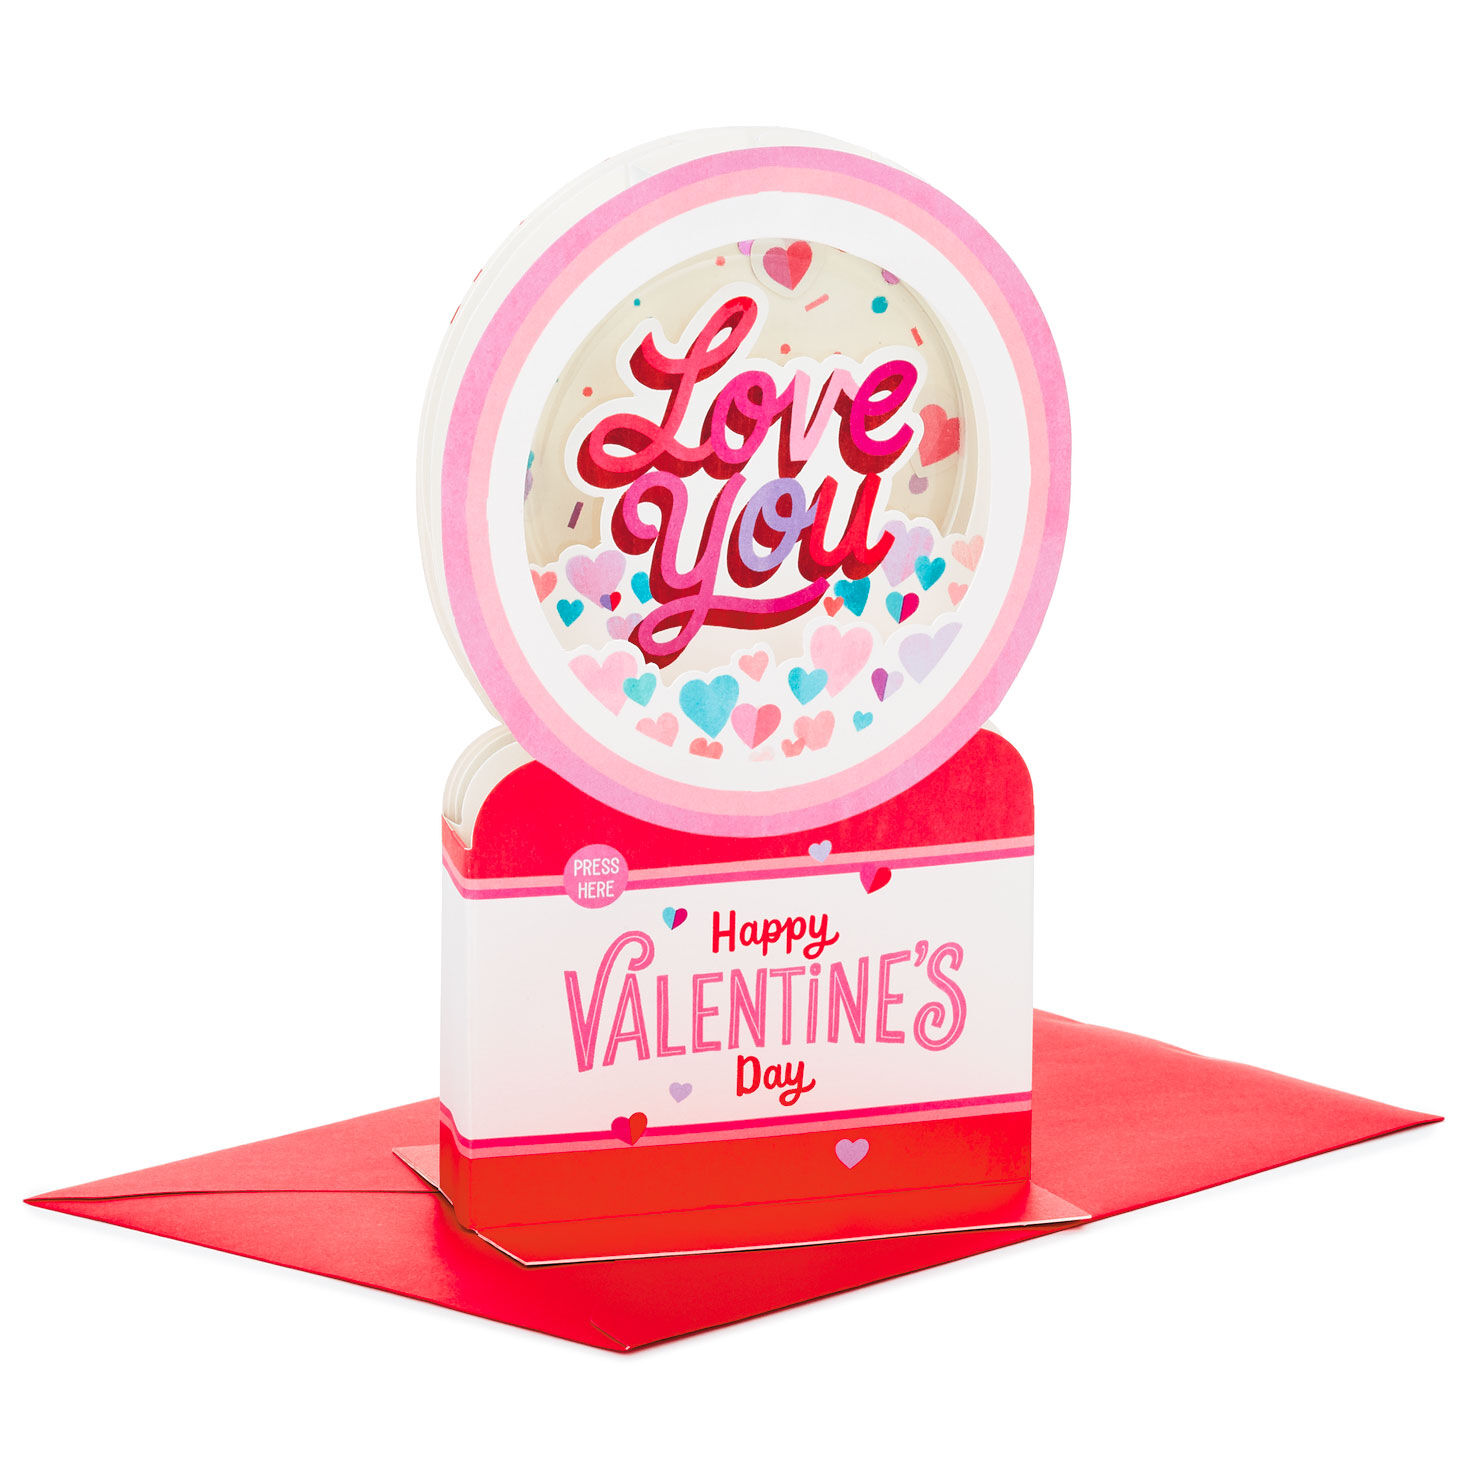 6 Valentine Cards with Envelopes, 6 Heart Emoticon Sticker Sheets Hallmark Pack of Valentines Day Cards for Kids with Stickers 